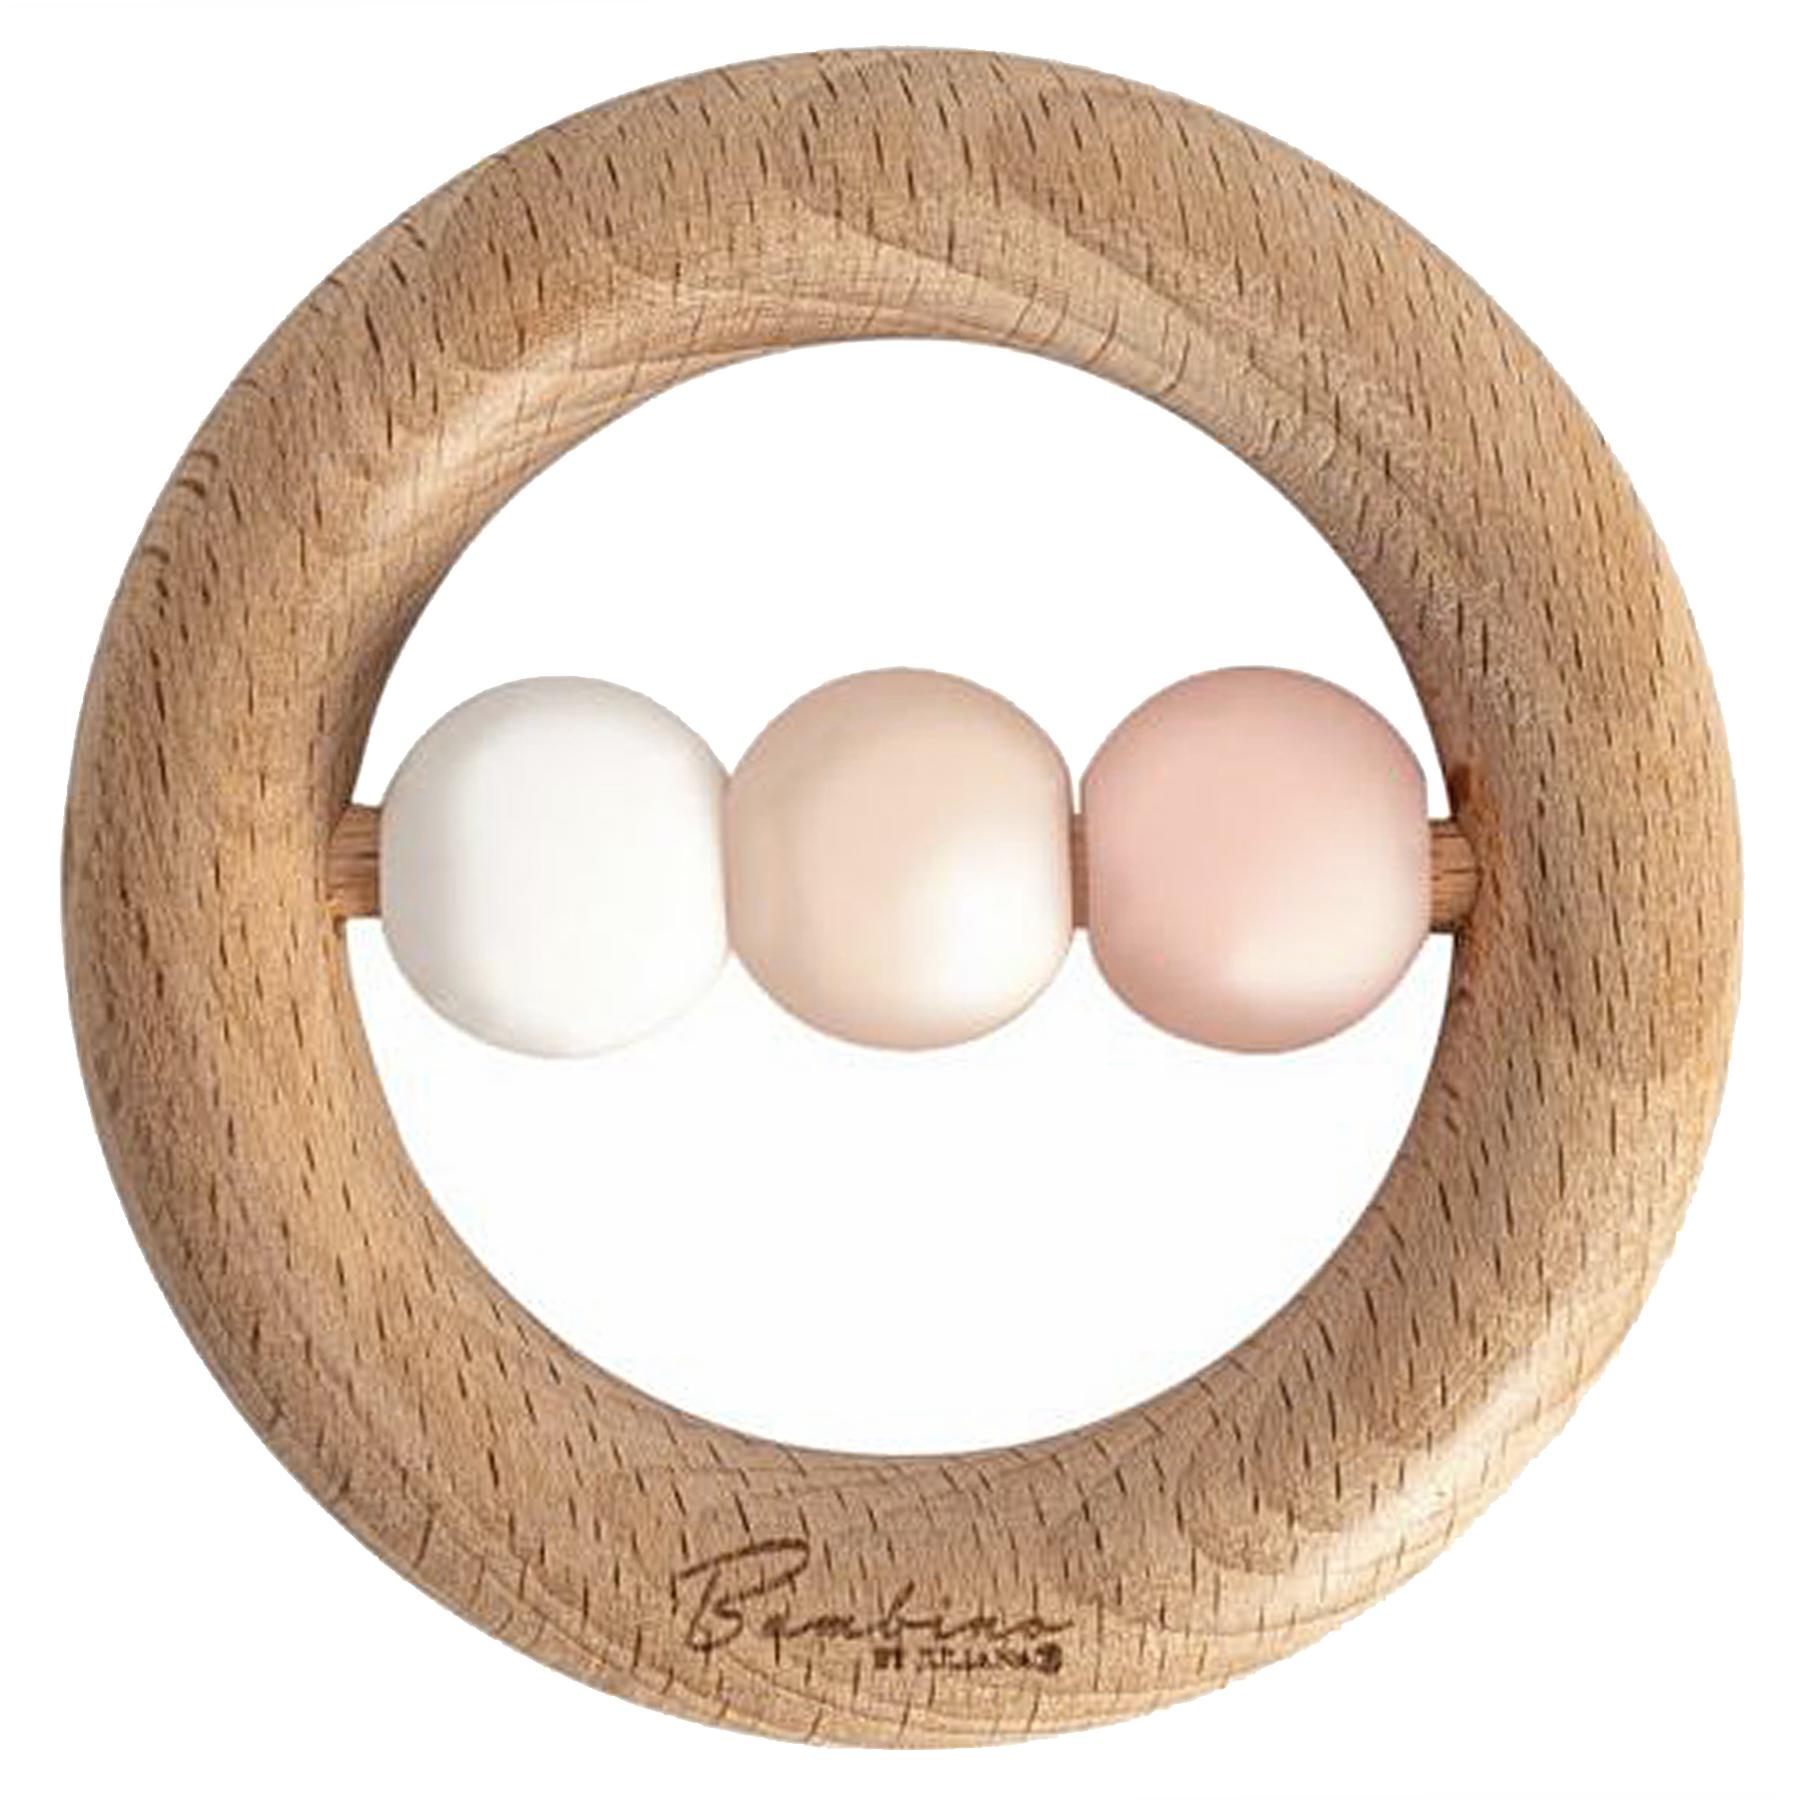 Bambino by Juliana® Round Pink Silicone Beads & Wood Teether